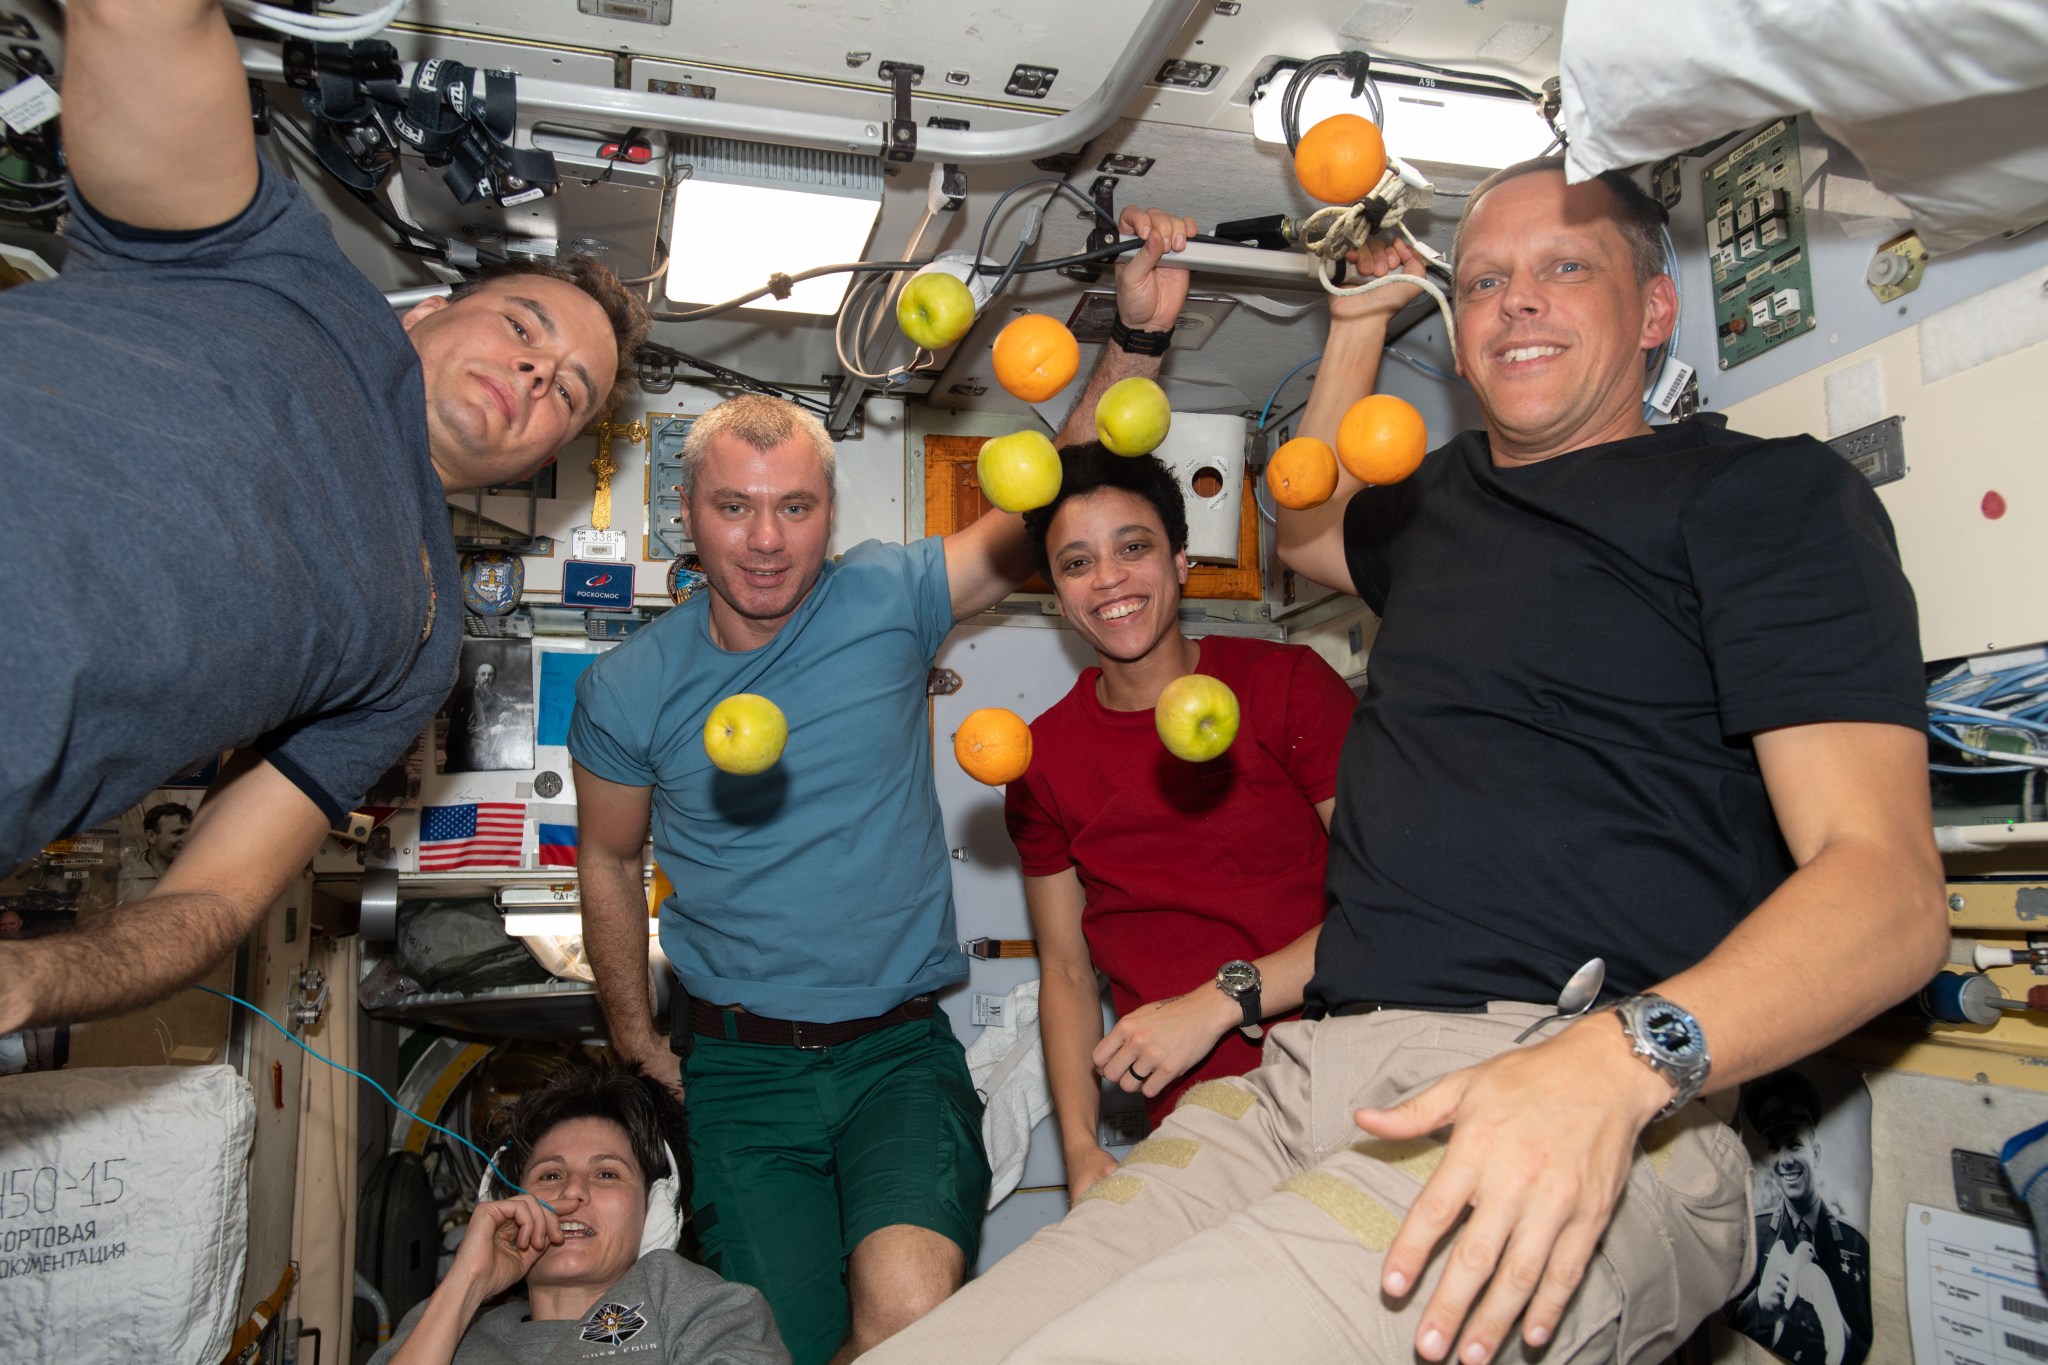 Expedition 67 crew members pose with fresh fruit flying weightlessly in microgravity delivered recently aboard the Progress 81 (81P) cargo craft. The 81P docked to the Zvezda service module's rear port aboard the International Space Station after a three-and-half-hour trip that began with a launch from the Baikonur Cosmodrome in Kazakhstan. Pictured from left are, Roscosmos Flight Engineer Sergey Korsakov; ESA (European Space Agency) Flight Engineer Samantha Cristofretti; Roscosmos Flight Engineer Denis Matveev; and NASA Flight Engineers Jessica Watkins and Bob Hines.